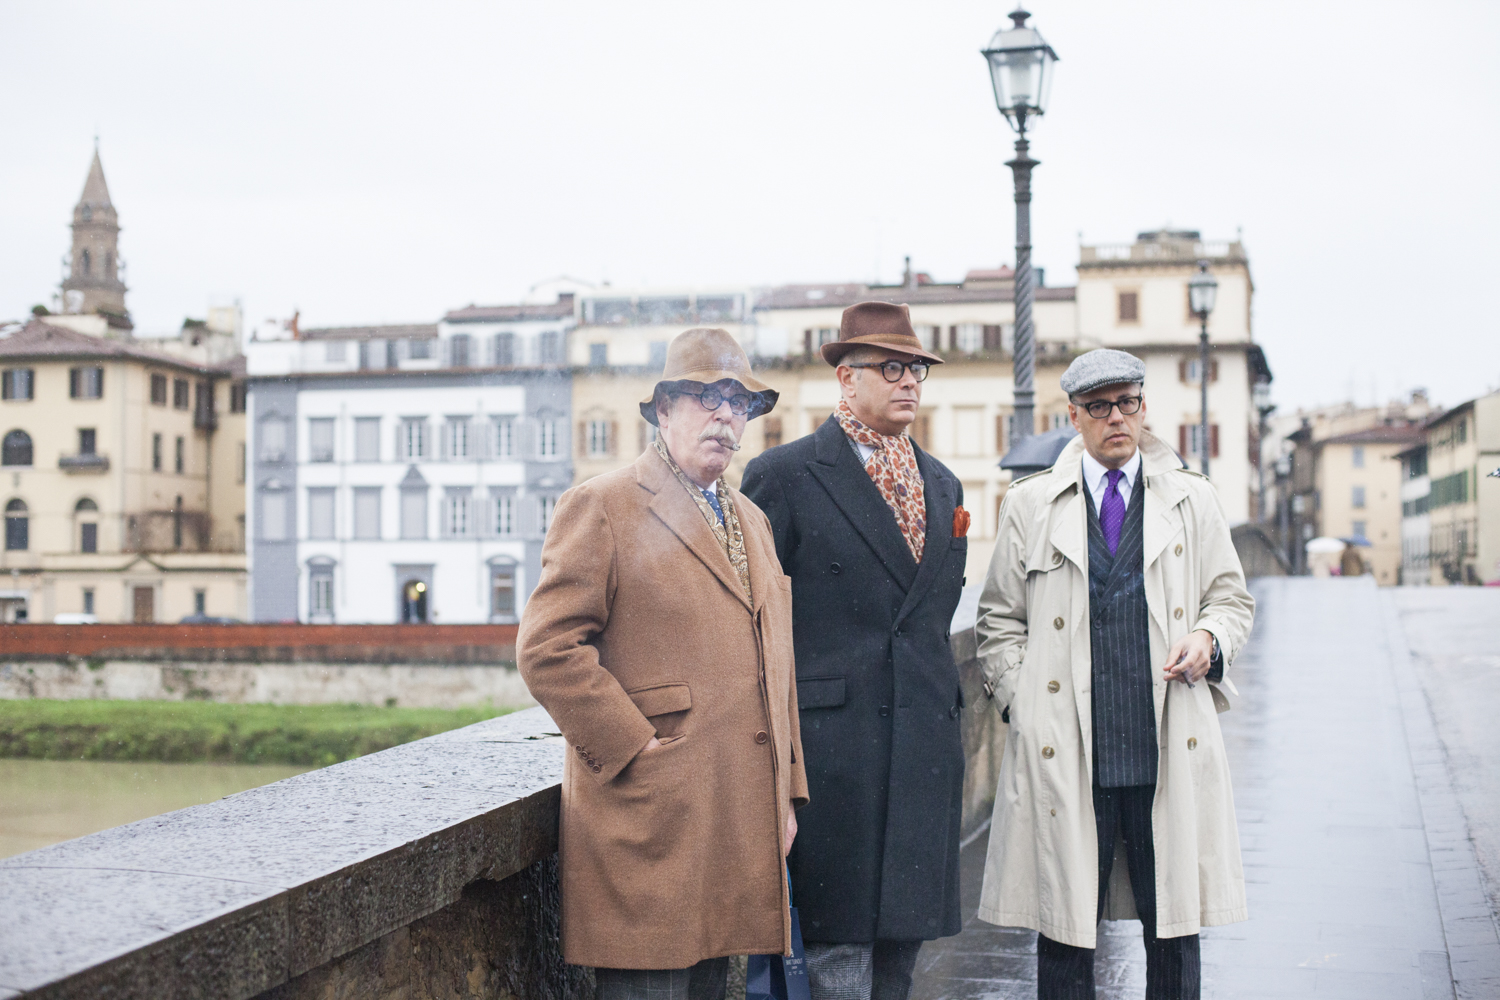 Stilemachile members Livious Brooler, Alfredo de Giglio, Mario Rossi photographed by Rose Callahan in Florence on Jan 14, 2016